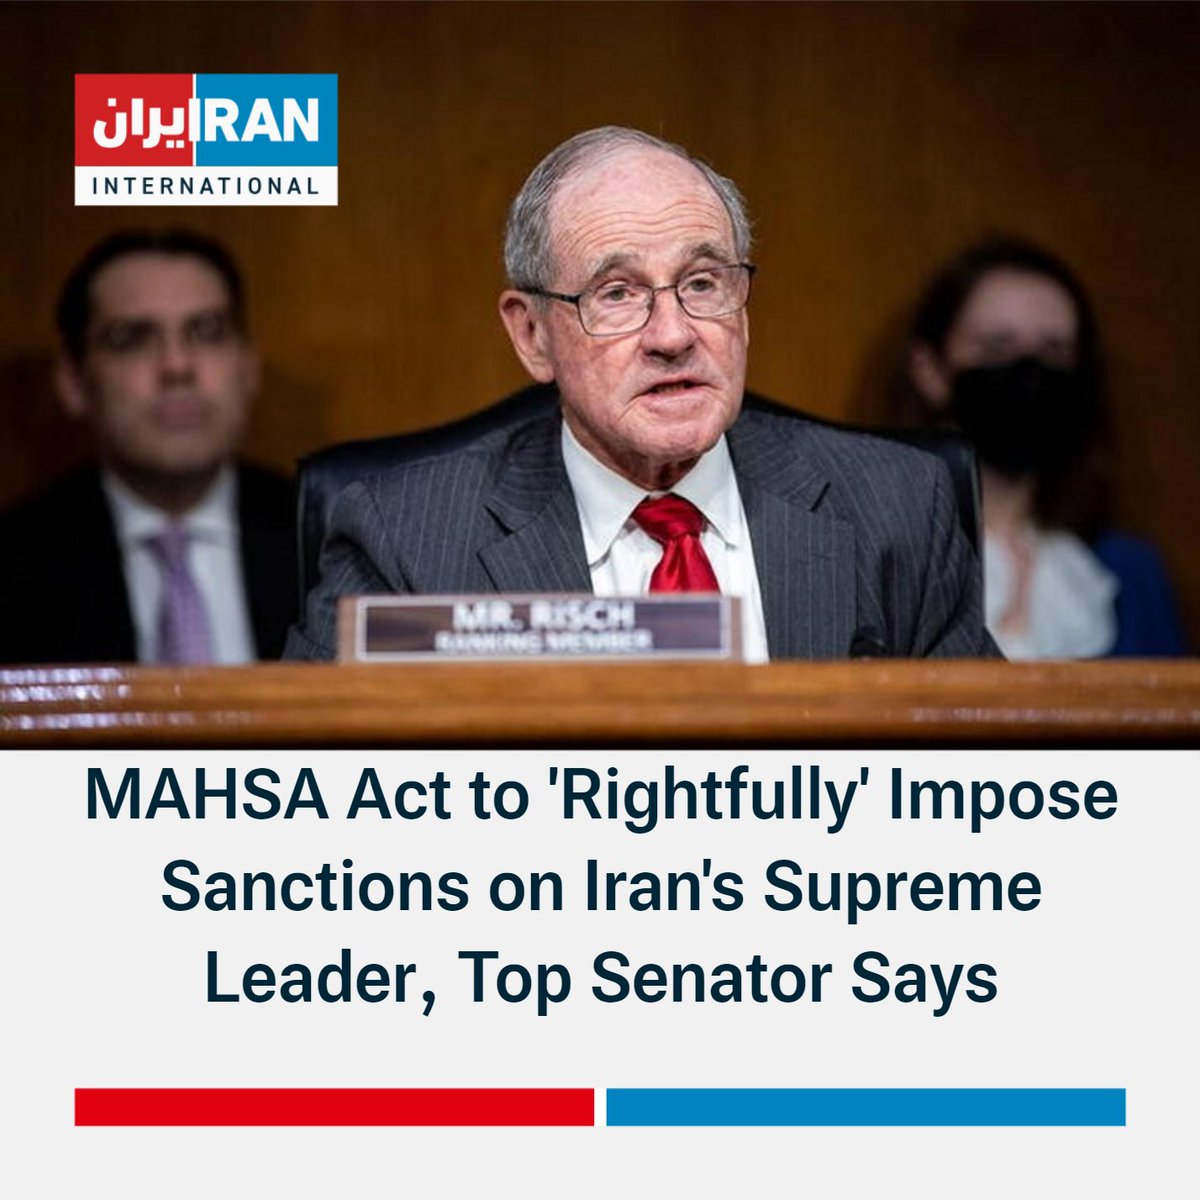 Senate Foreign Relations Commitee Ranking Member @SenatorRisch: I'm grateful for the passage of the MASHA Act which will rightfully impose sanctions on Iran’s supreme leader, president, and their respective offices for the human rights abuses and terrorism they have supported.